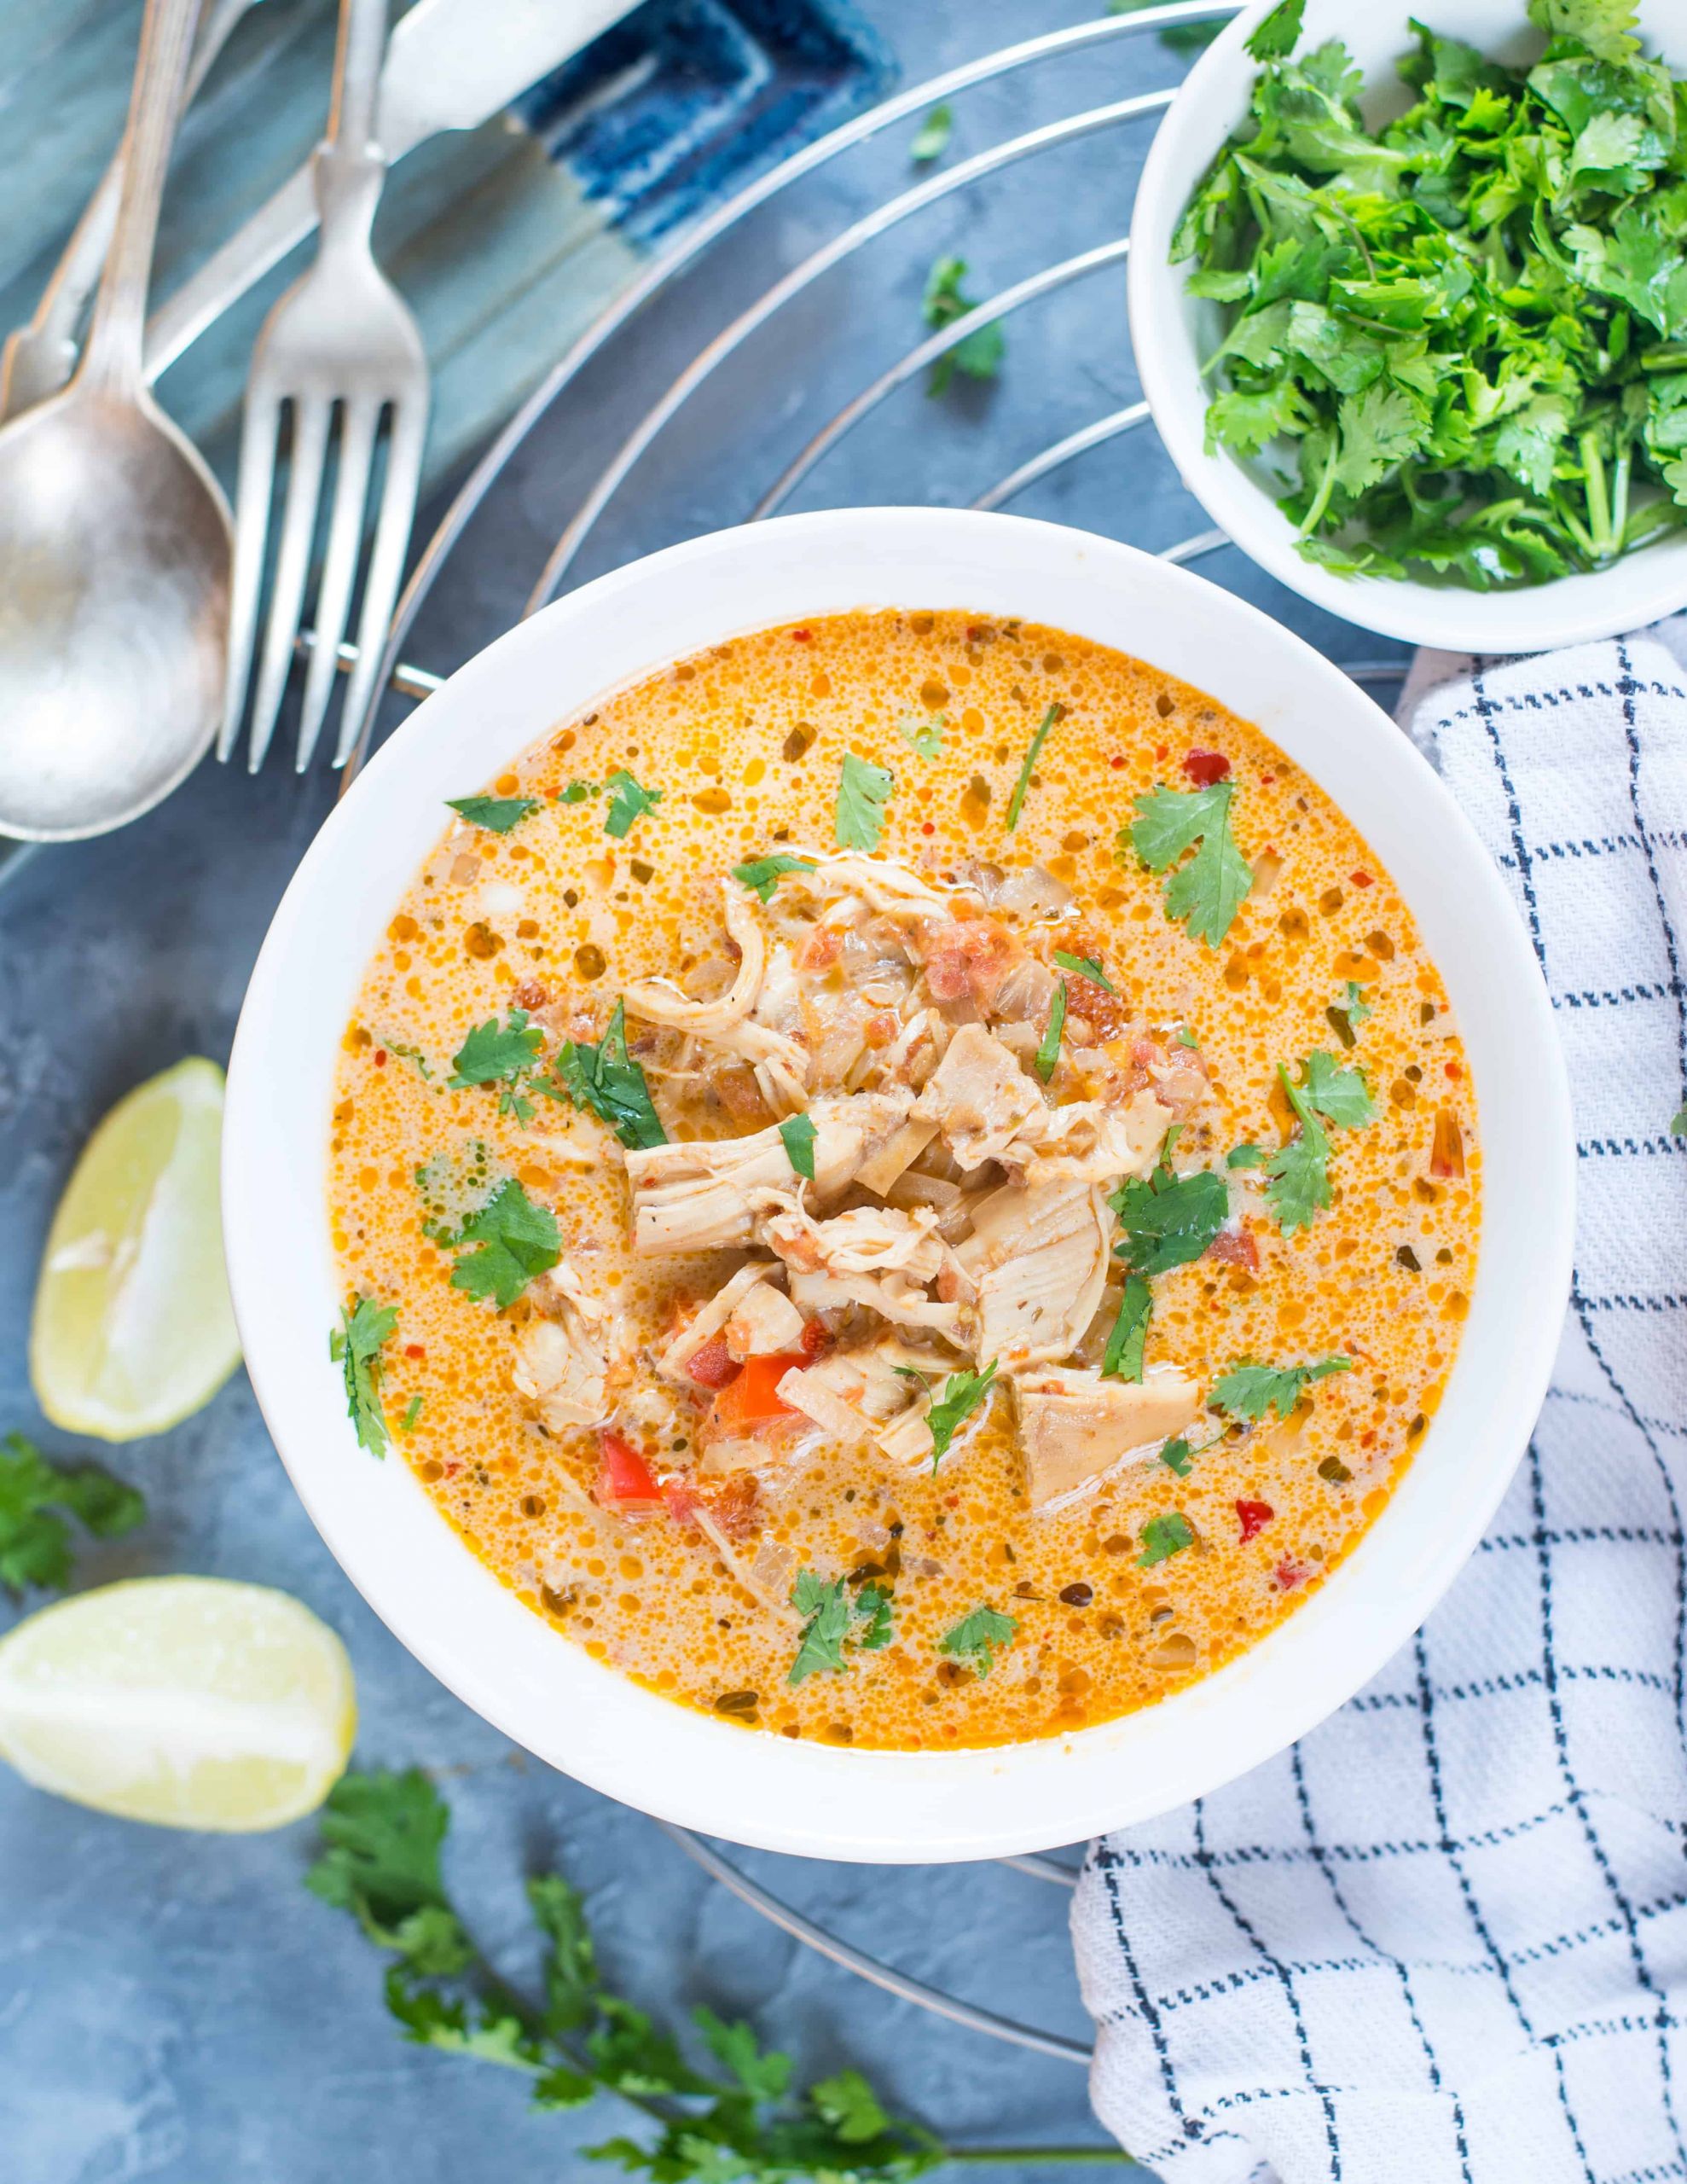 Crockpot Keto Chicken Soup
 SLOW COOKER MEXICAN CHICKEN SOUP The flavours of kitchen